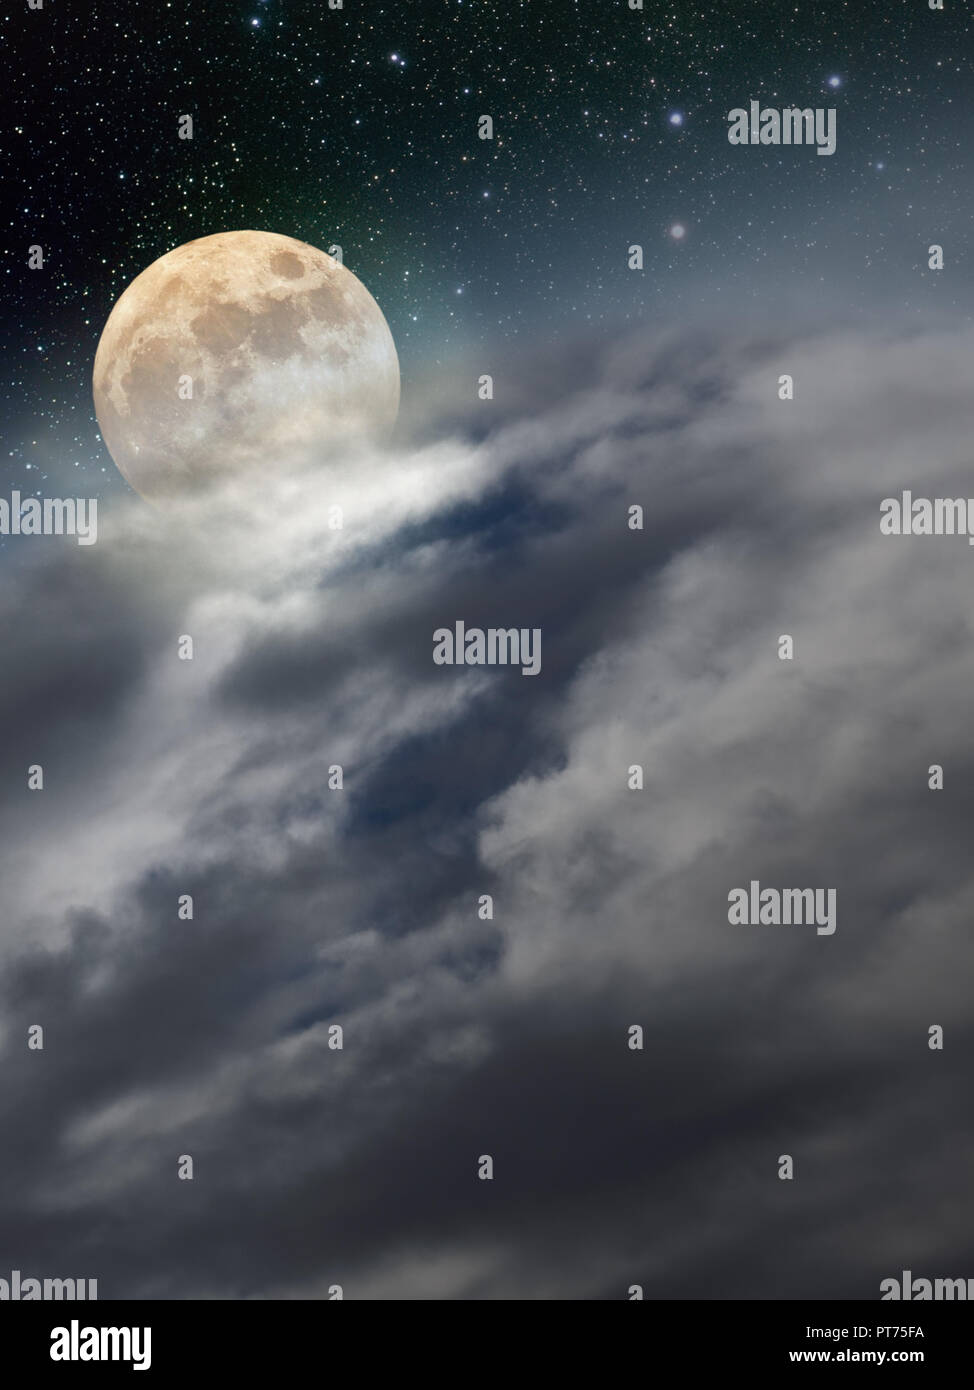 The moon rises over a region covered with clouds Stock Photo